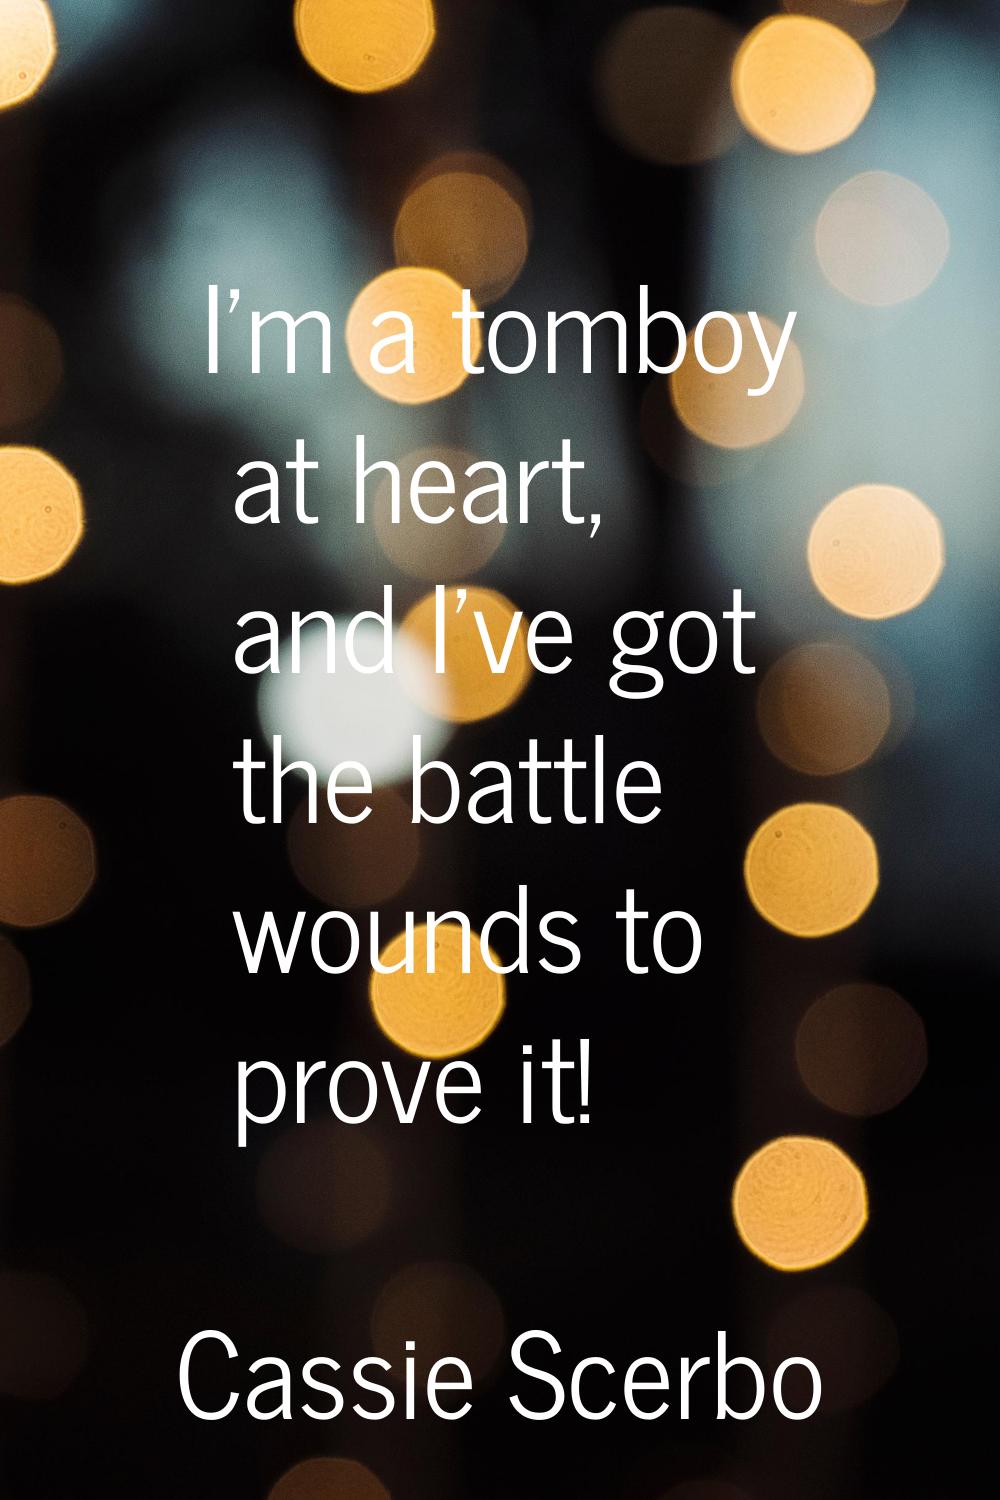 I'm a tomboy at heart, and I've got the battle wounds to prove it!